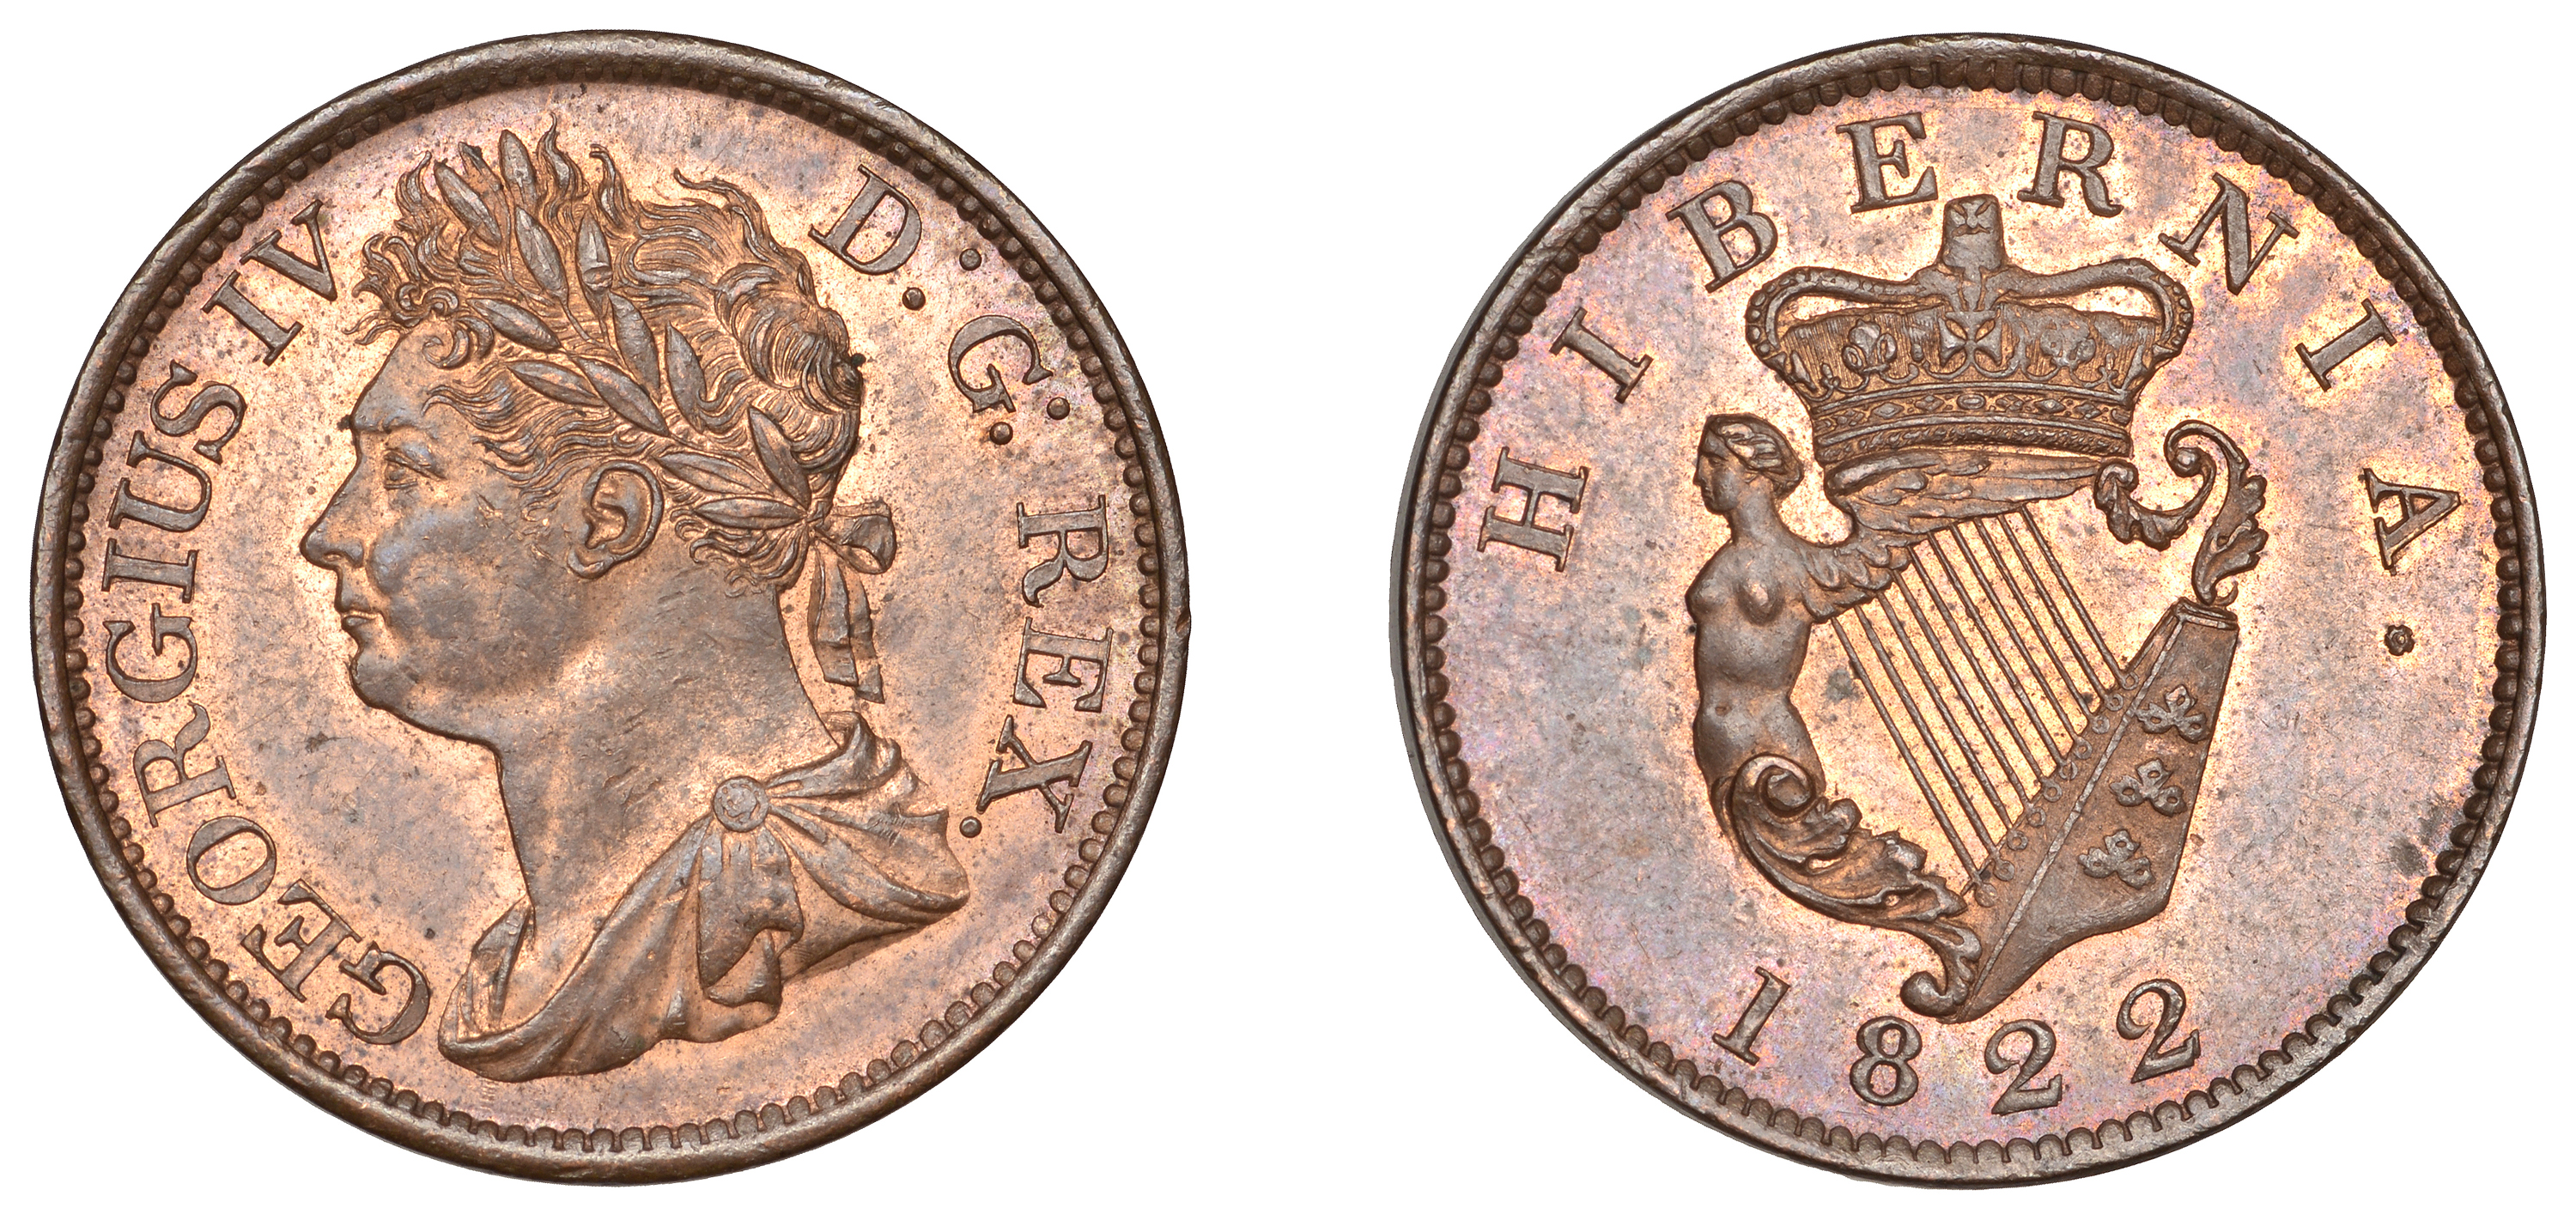 George IV, Halfpenny, 1822 (S 6624). A few tiny rim nicks, otherwise good extremely fine, so...